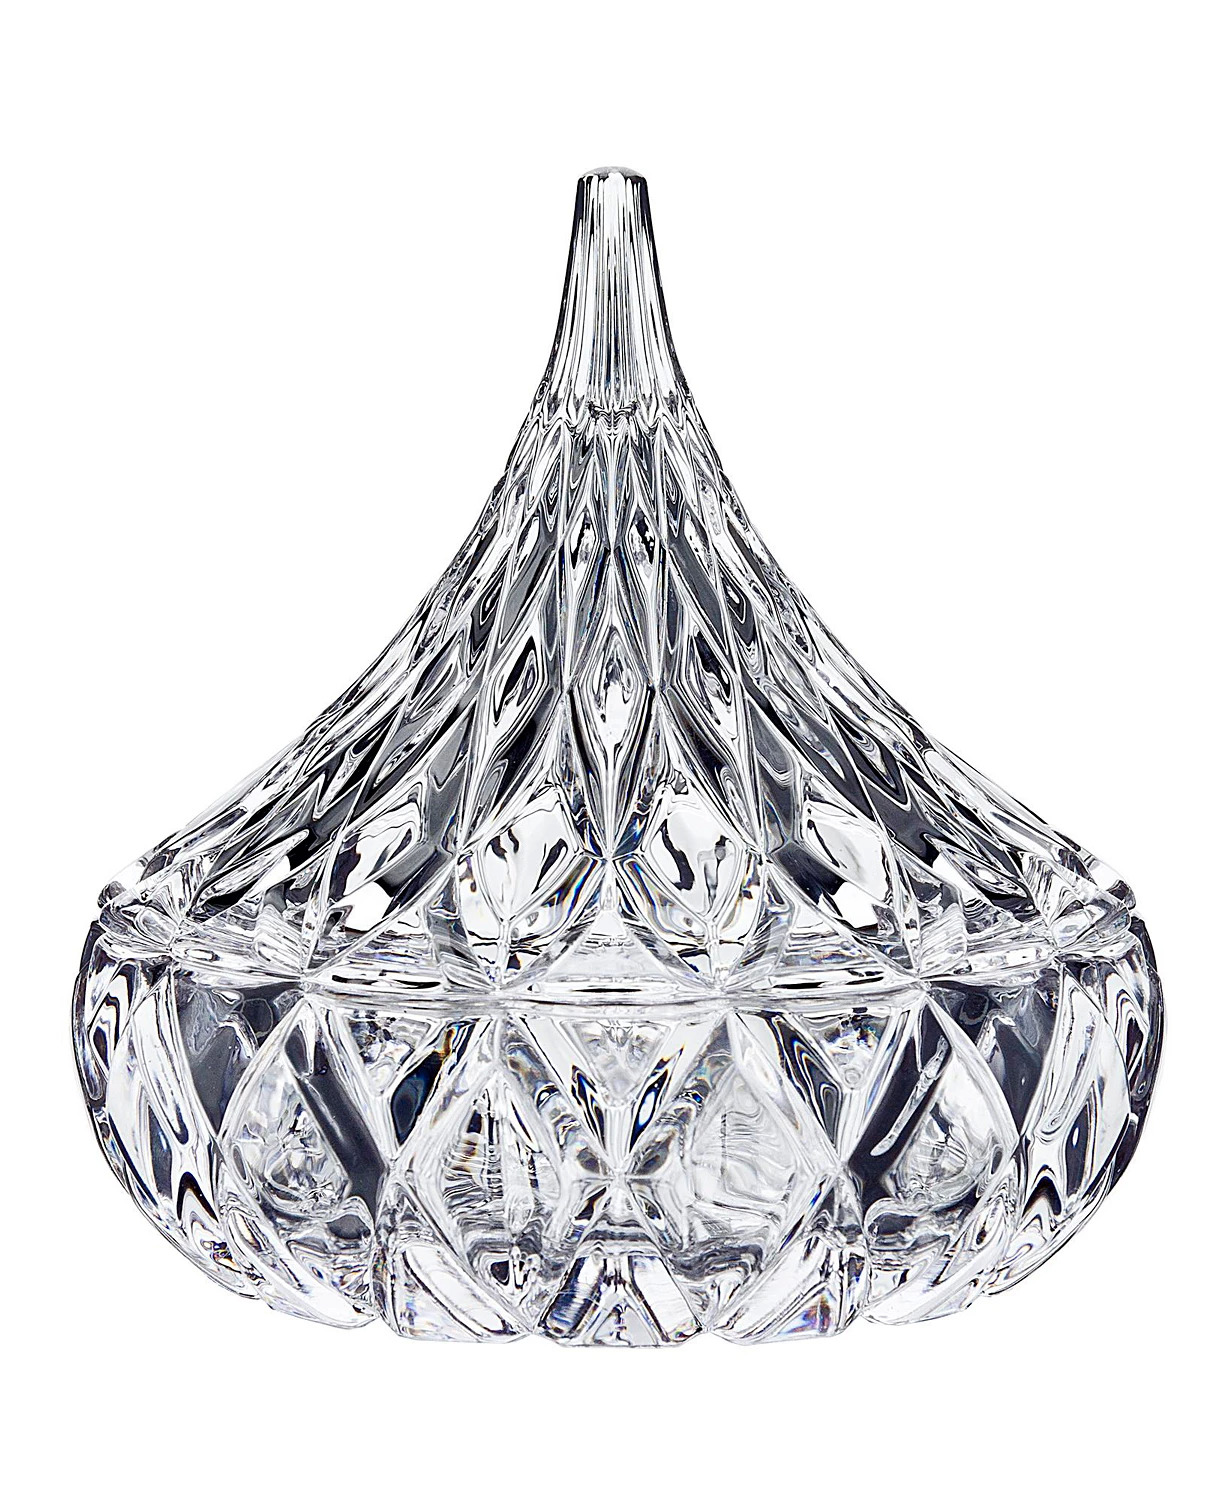 Godinger Hershey's Kiss Candy Dish (various colors) $7 & More + 6% SD Cashback + Free Shipping on $25+